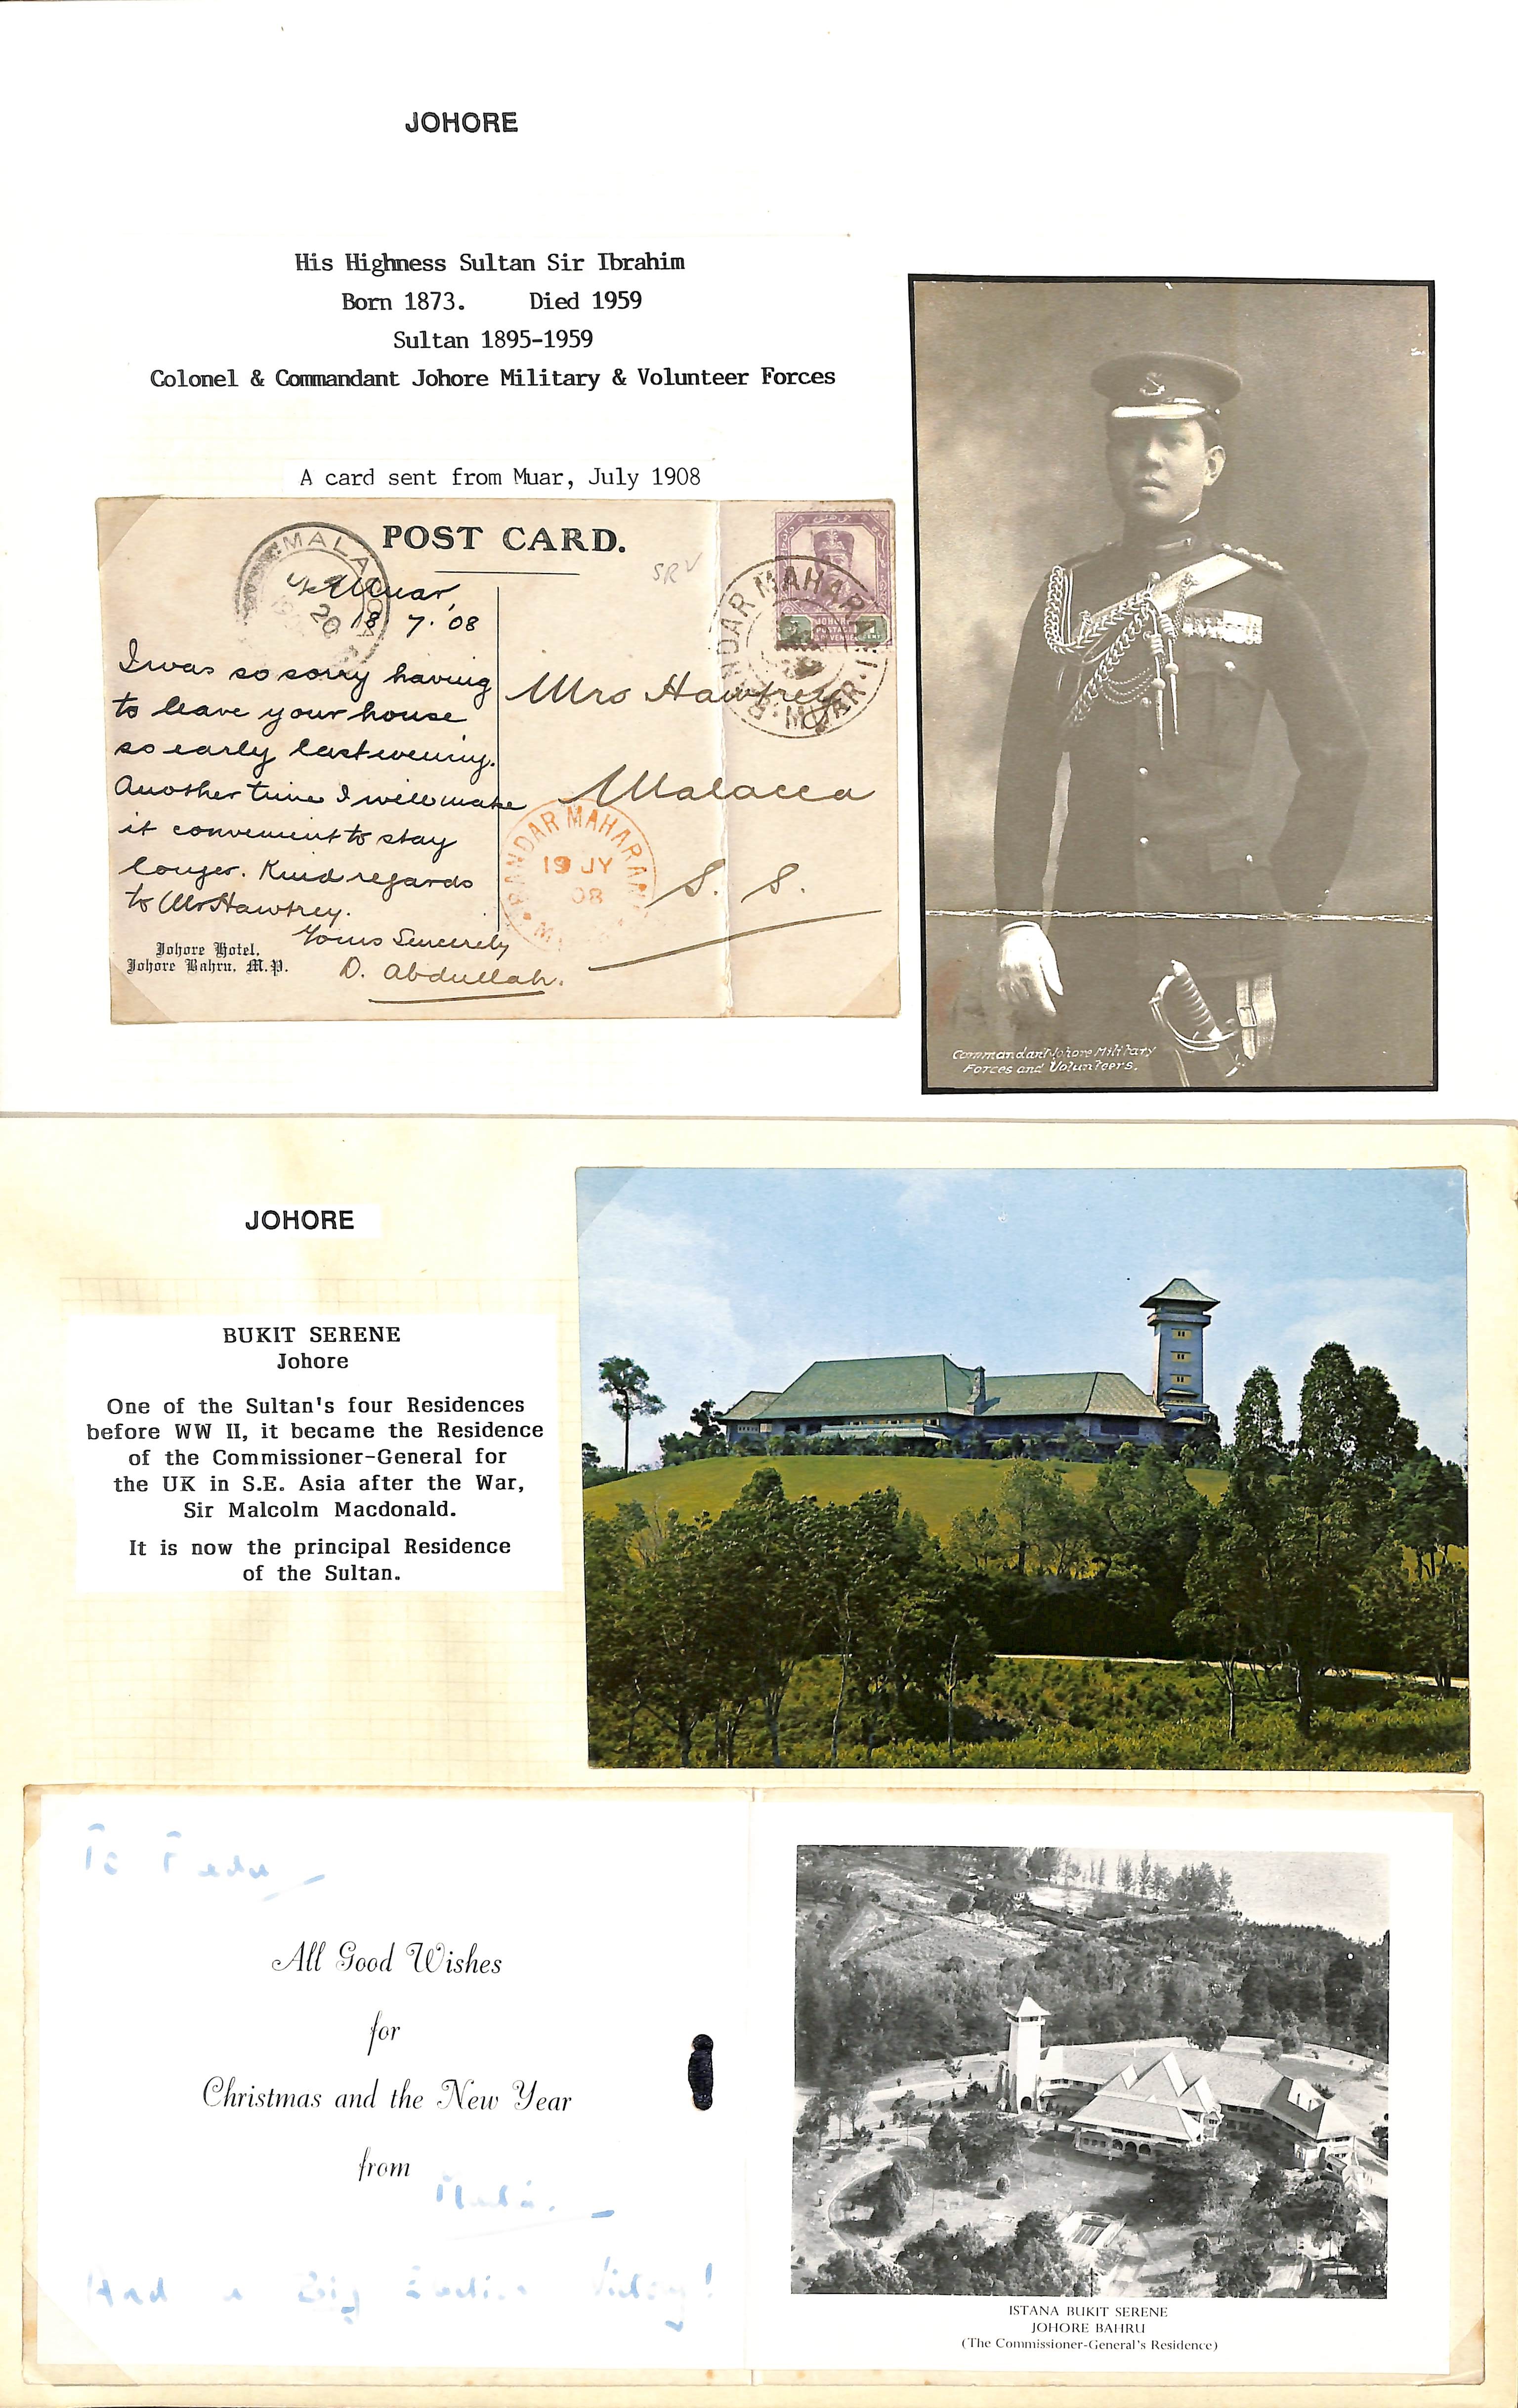 Johore. 1908-64 Covers, cards and ephemera including 1913 Red Band envelope from Kota Tinggi to - Image 6 of 7